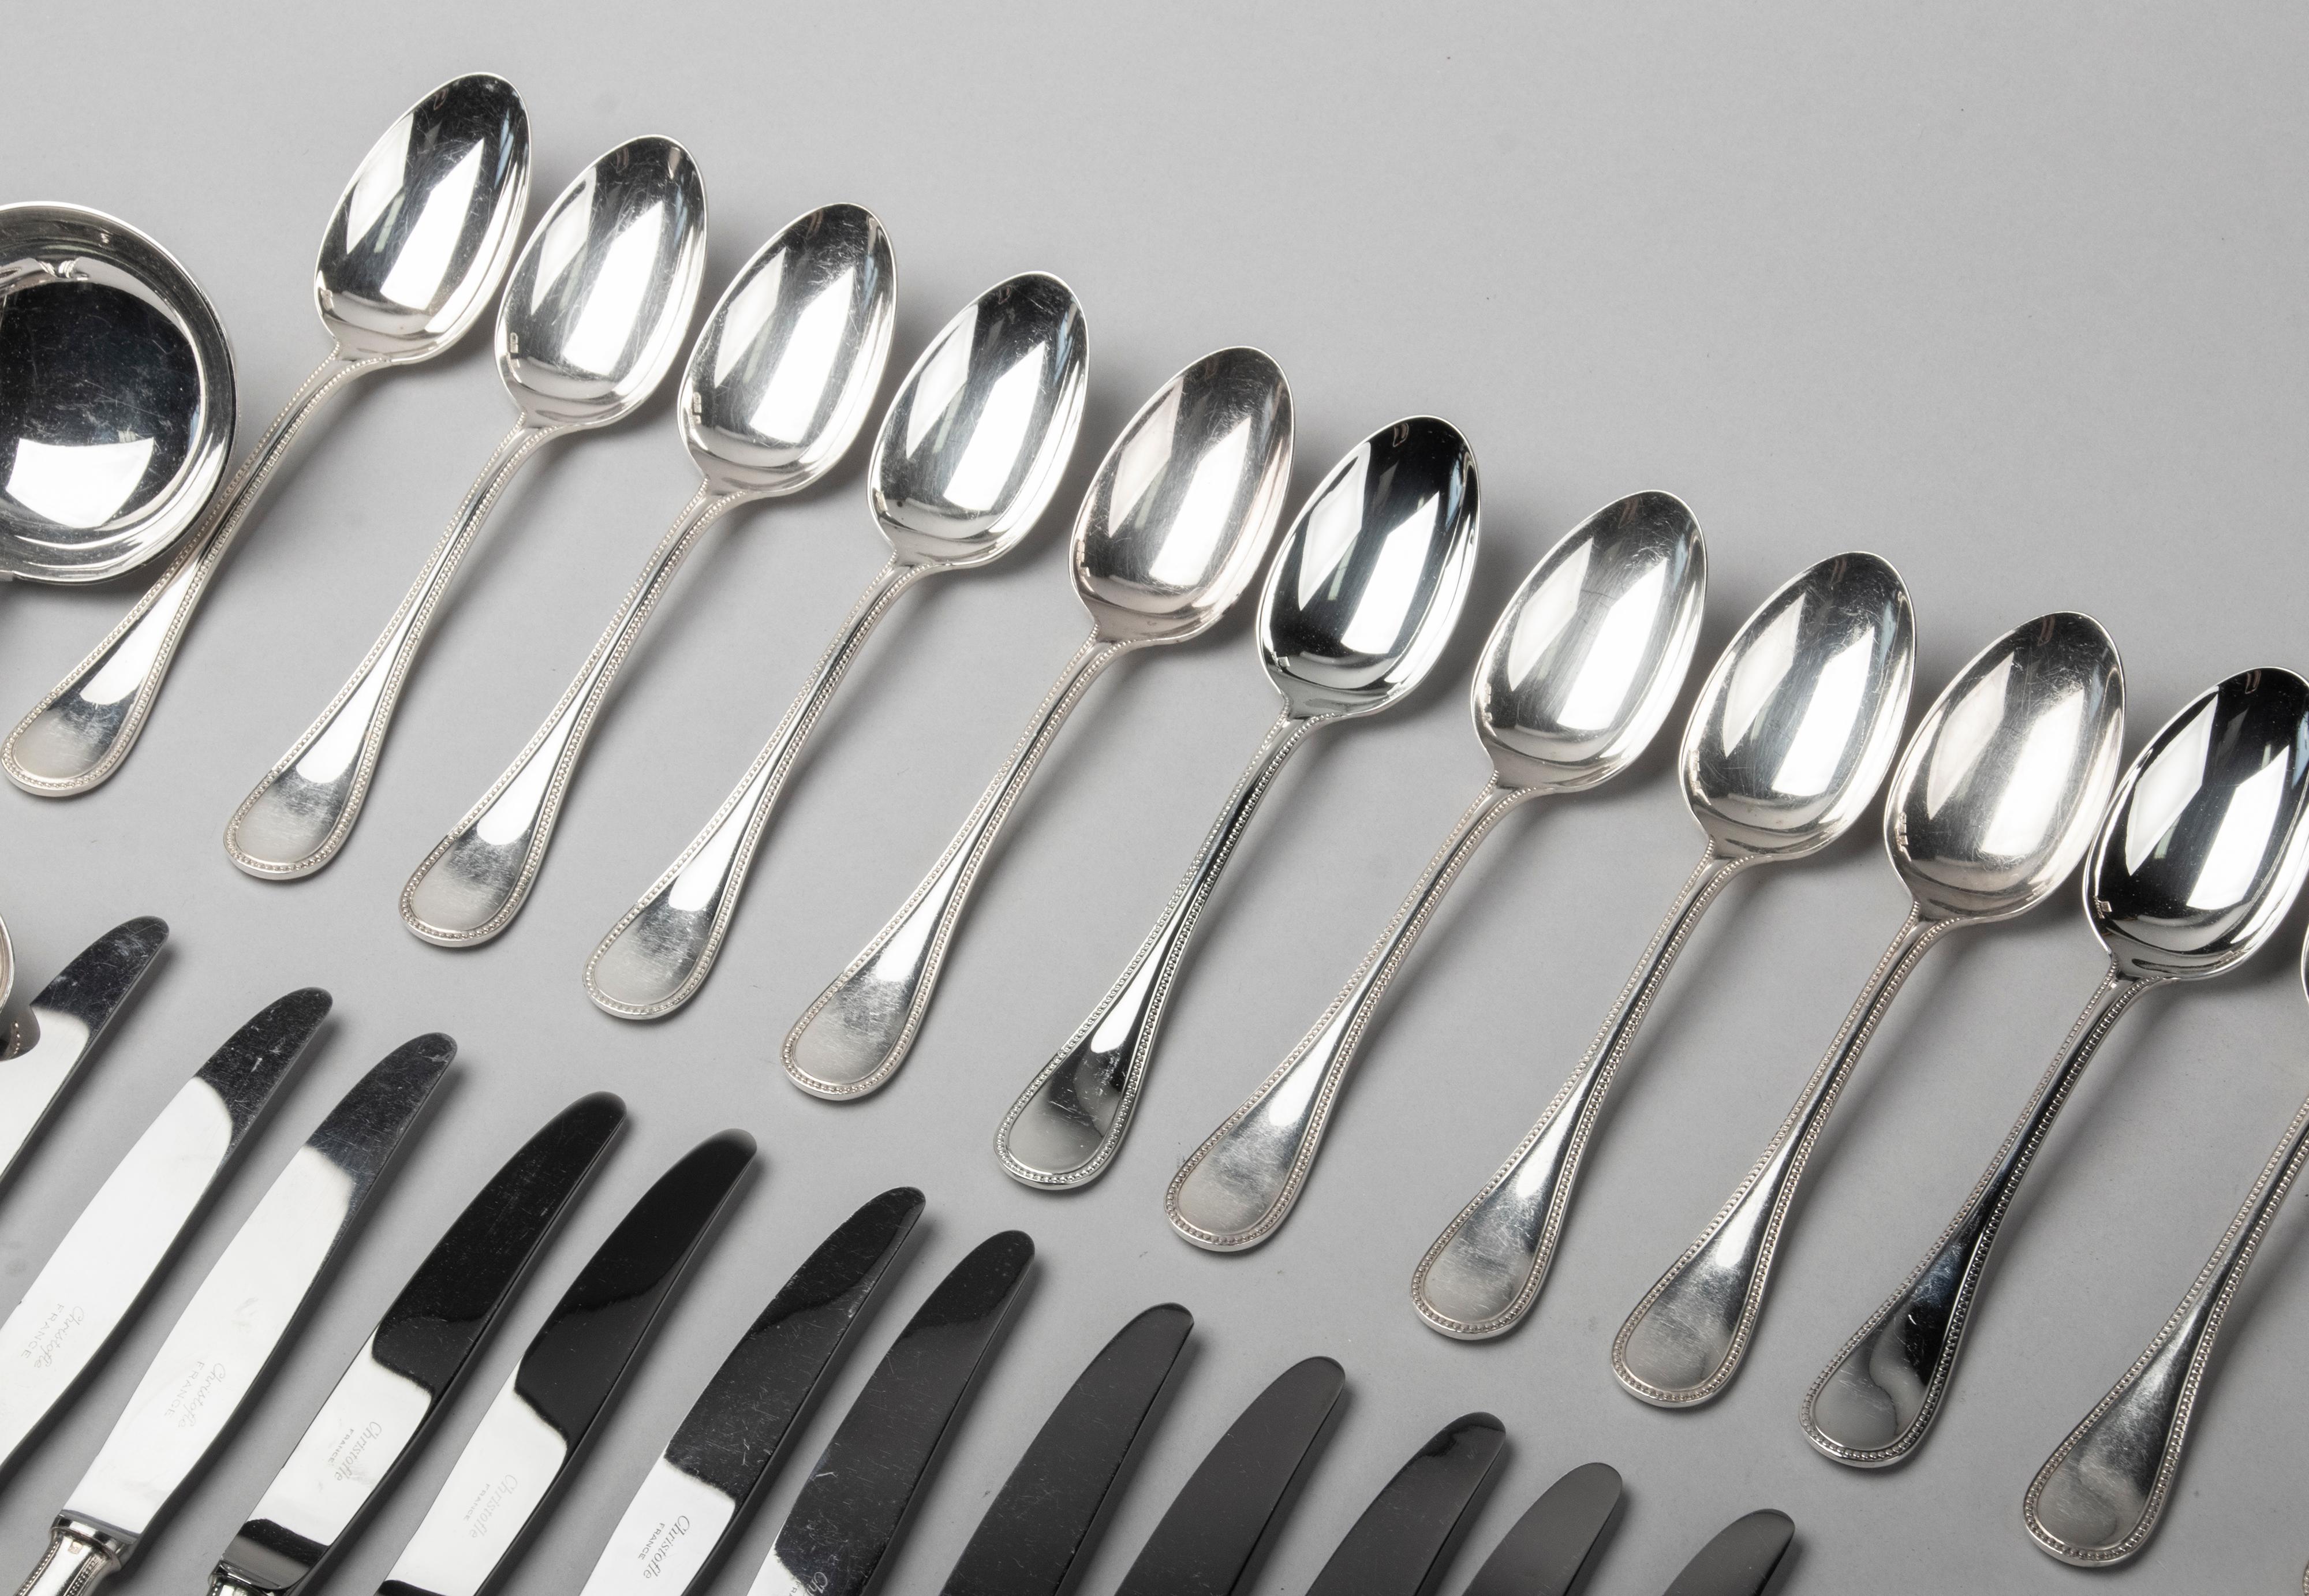 74-Piece Set of Silver-Plated Flatware by Christofle Model 'Perles' for 12 10